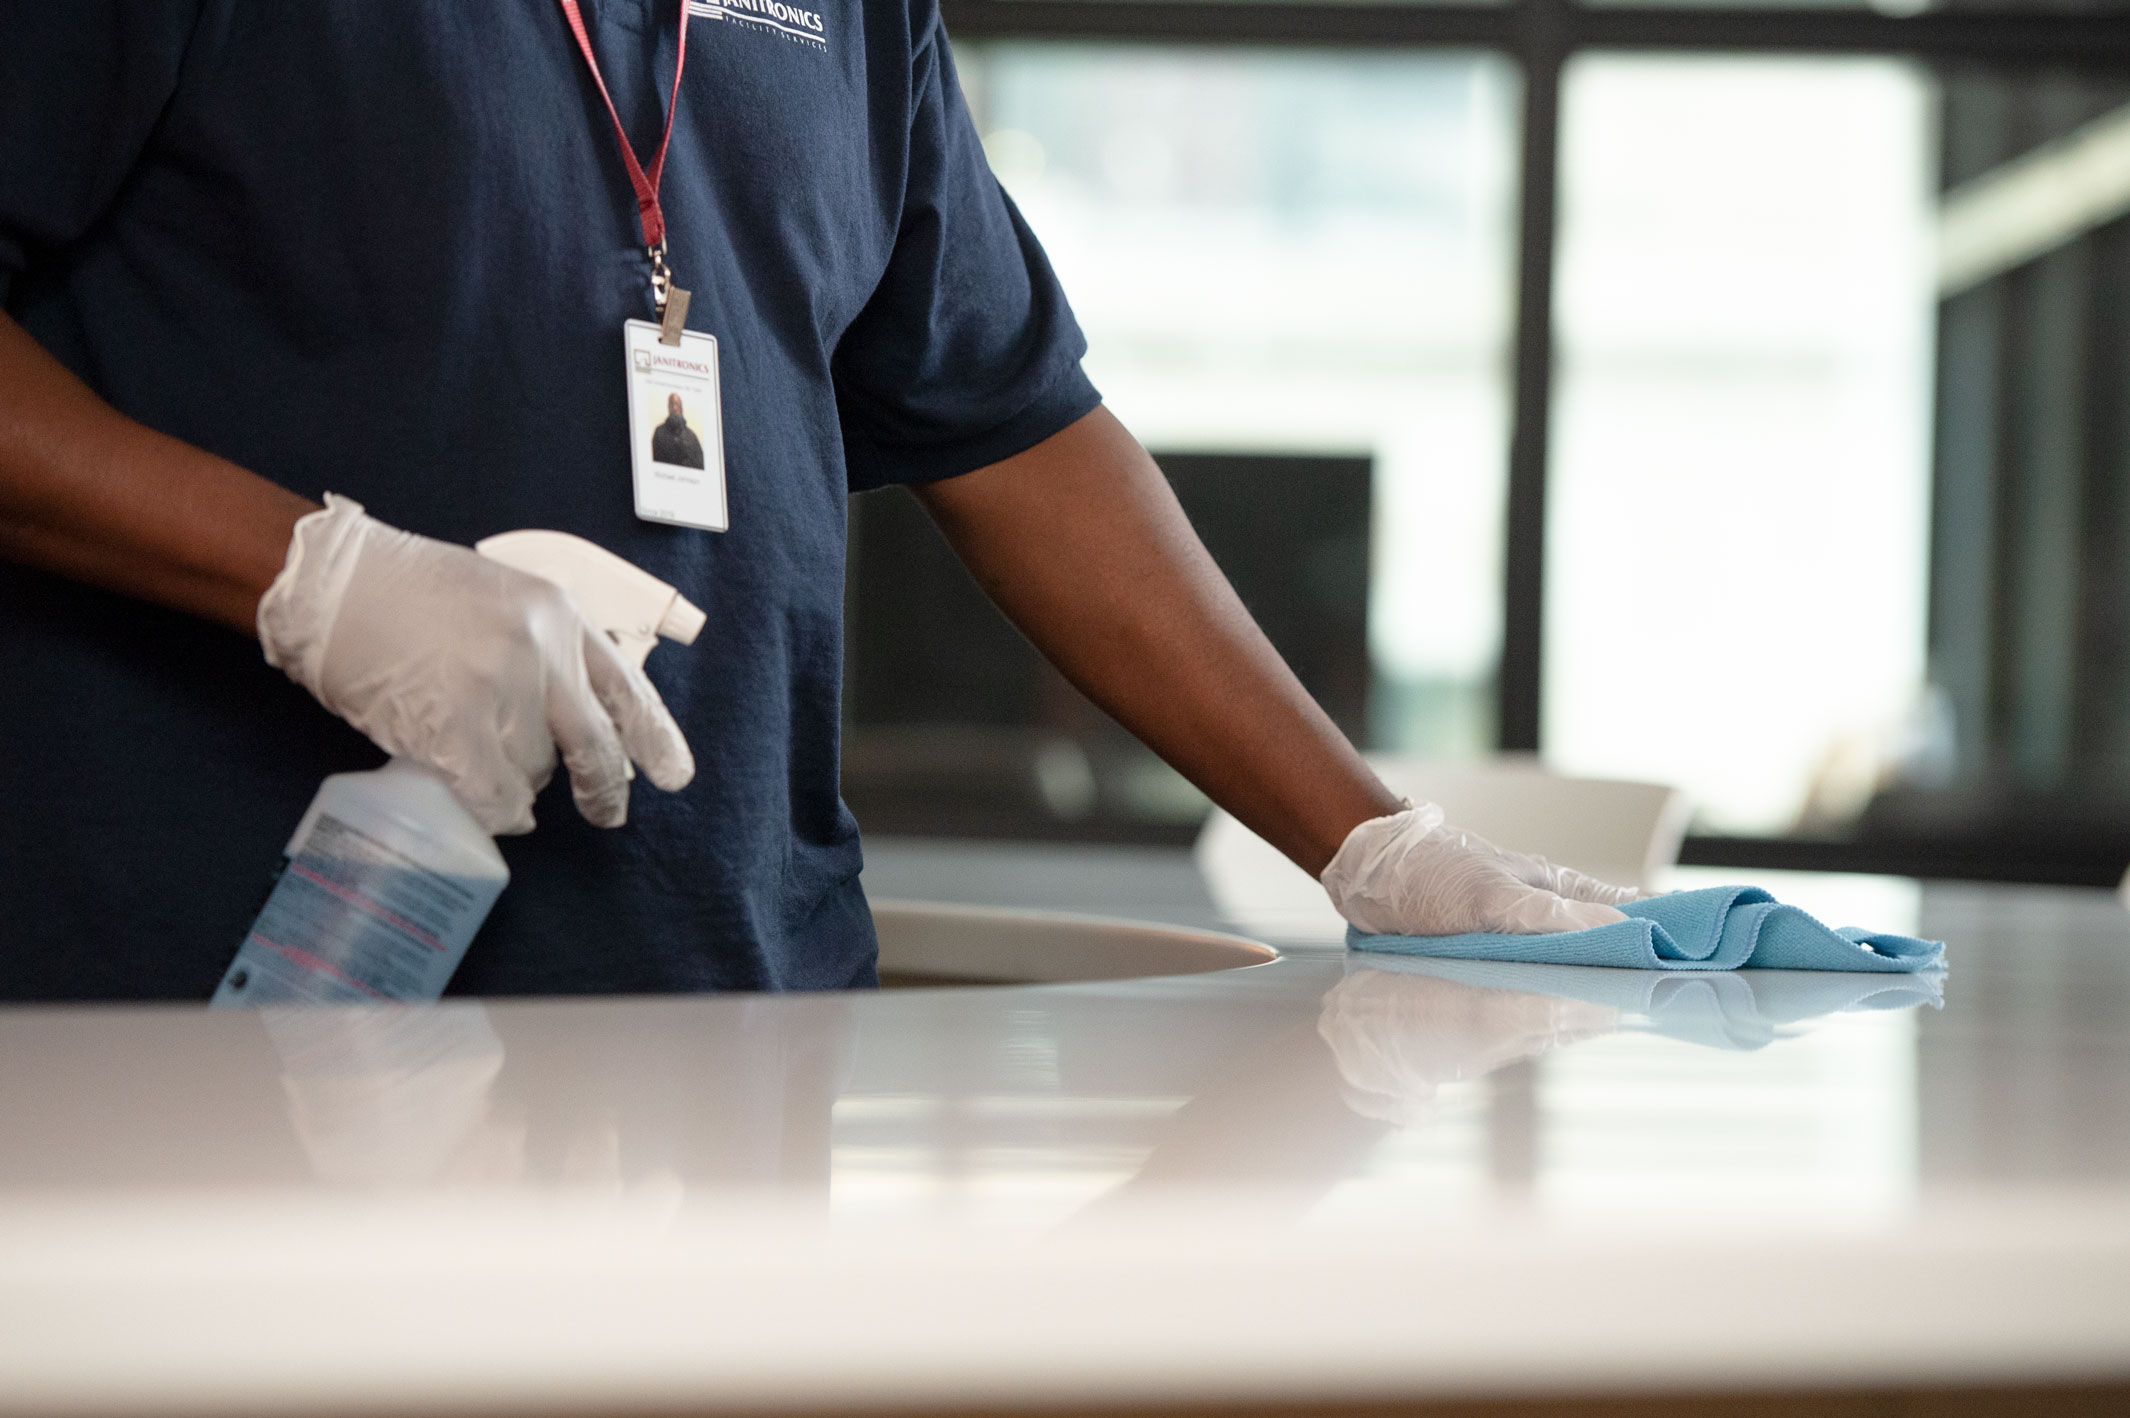 Janitronics technician wiping down table with blue microfiber cloth